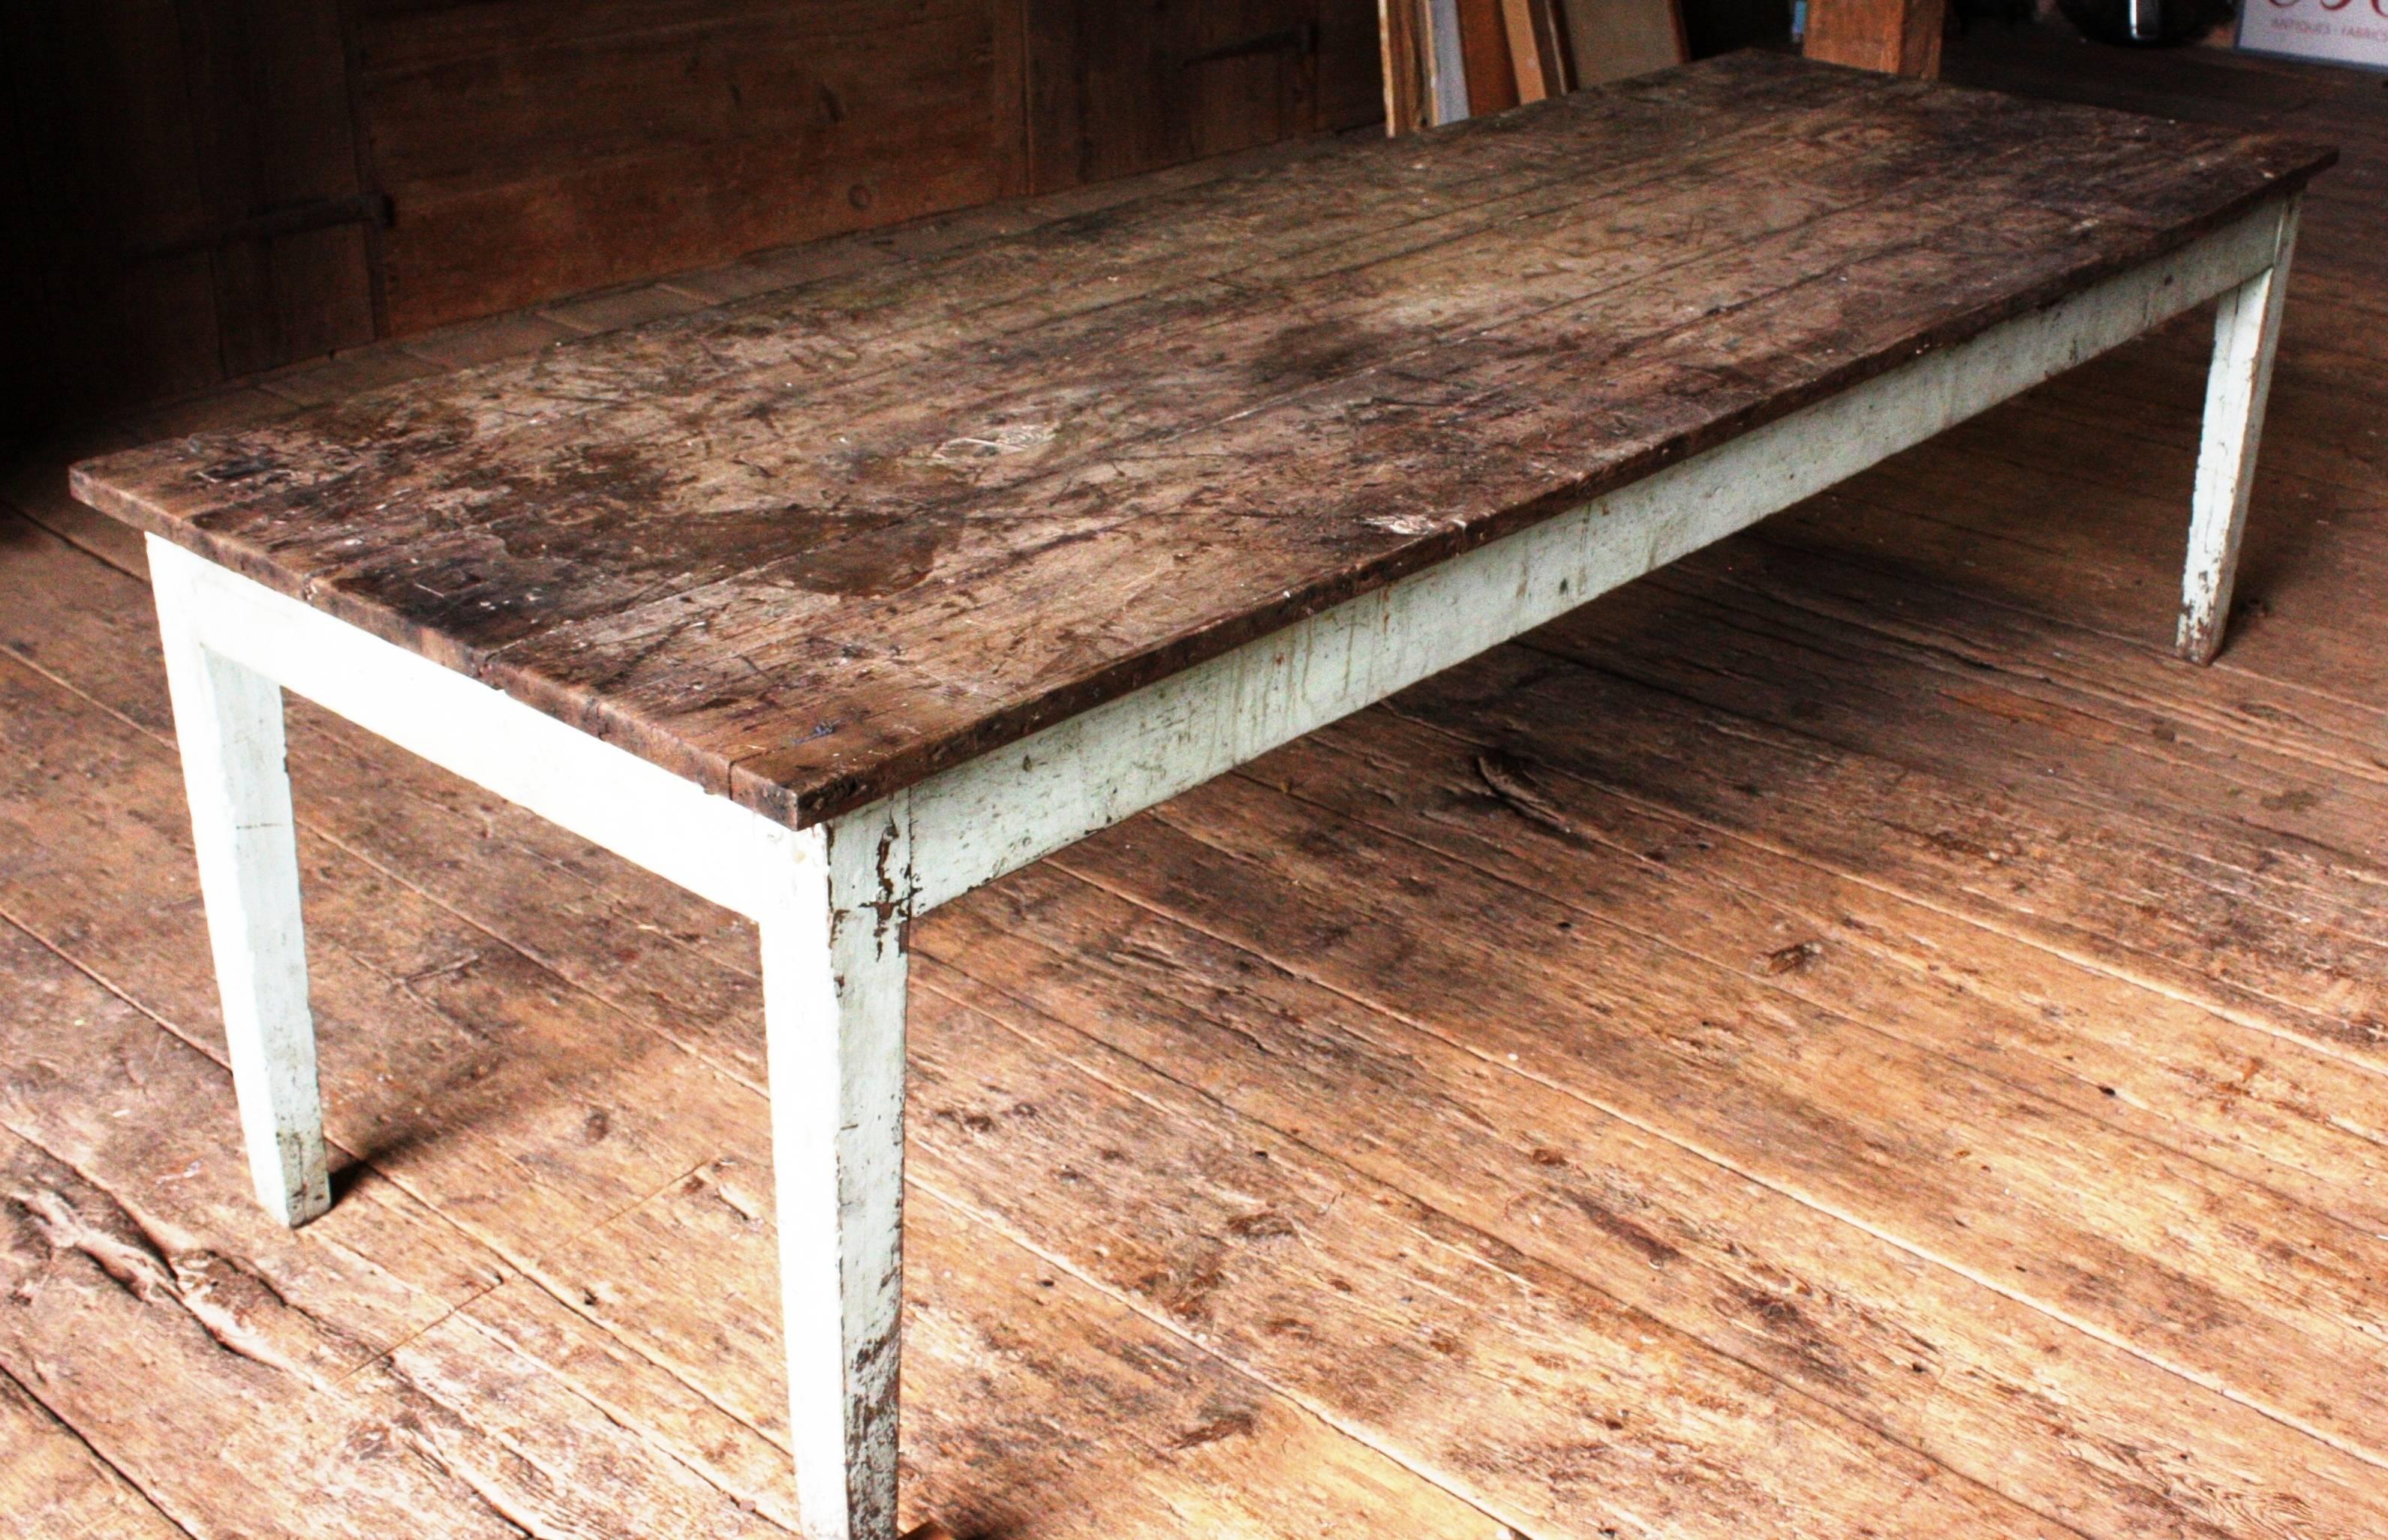 A 19th century French country plank top farm table with blue painted base, very distressed with wear and stains to the top. The underside of the table has interesting carved graffiti with dates ranging from the 1870s through the 1890s. 
Lots of